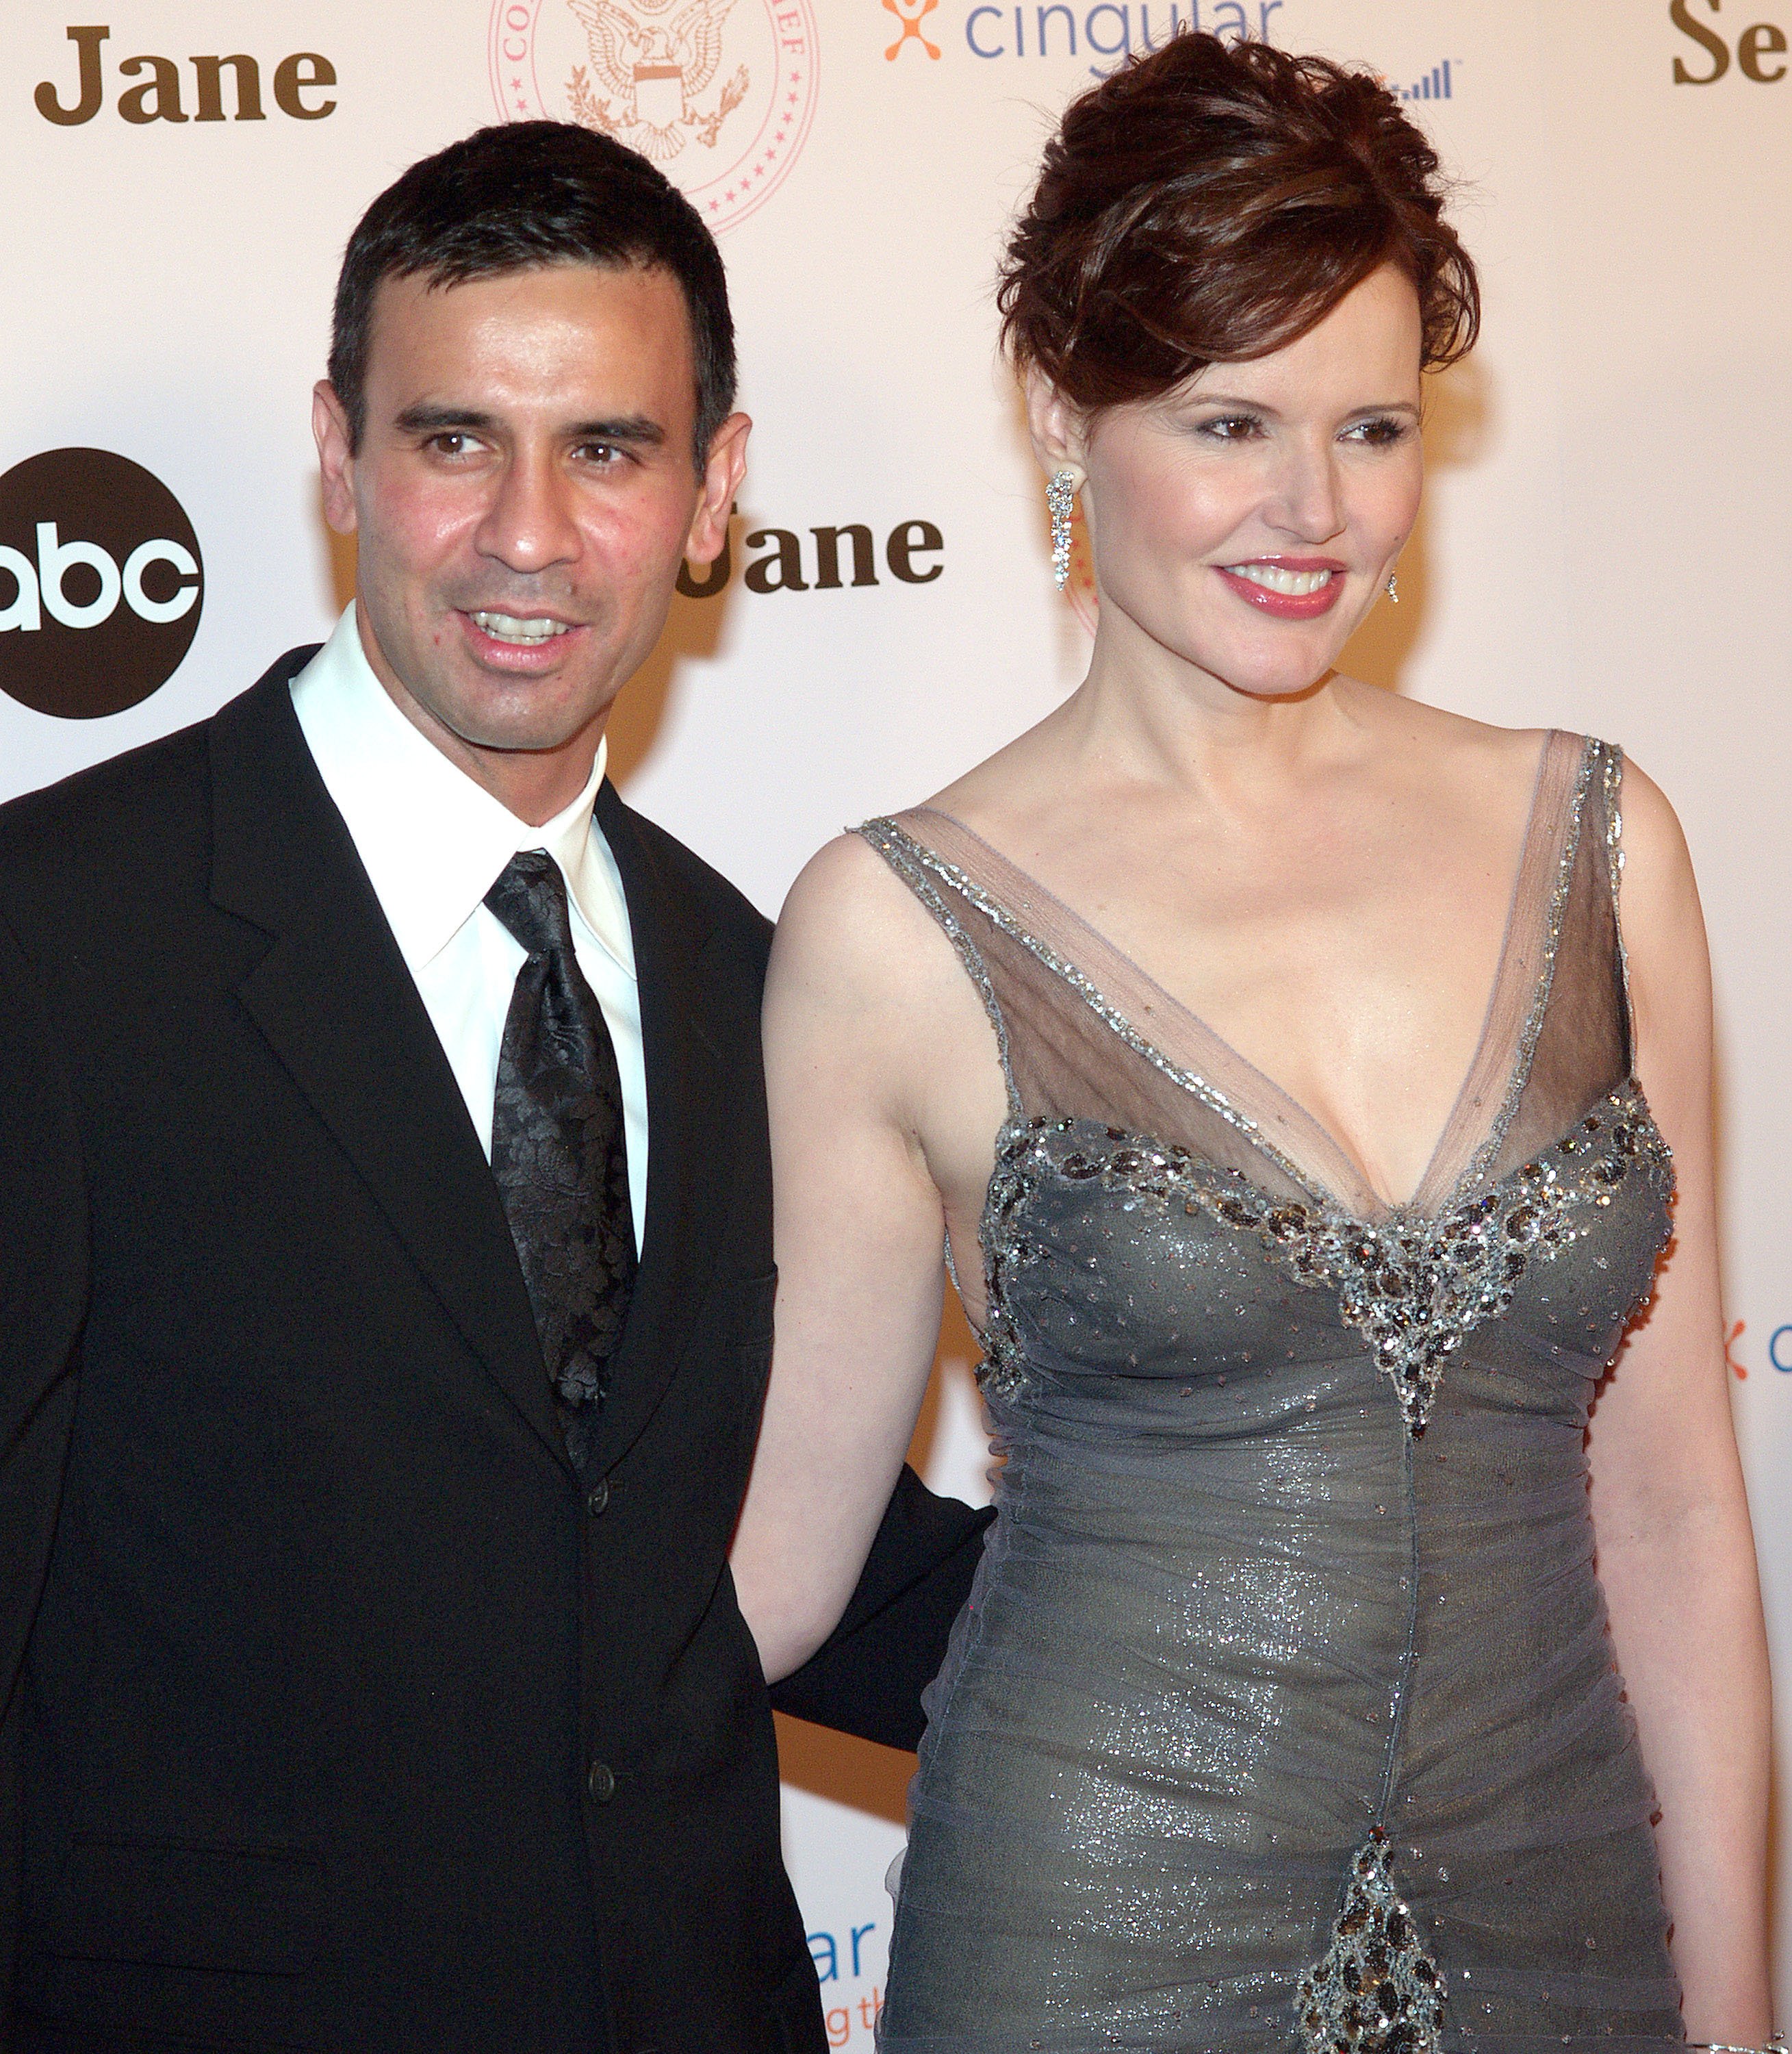 Reza Jarrahy and Geena Davis during "Commander-in-Chief" Inaugural Ball and premiere screening at Regent Beverly Wilshire in Beverly Hills, California. / Source: Getty Images